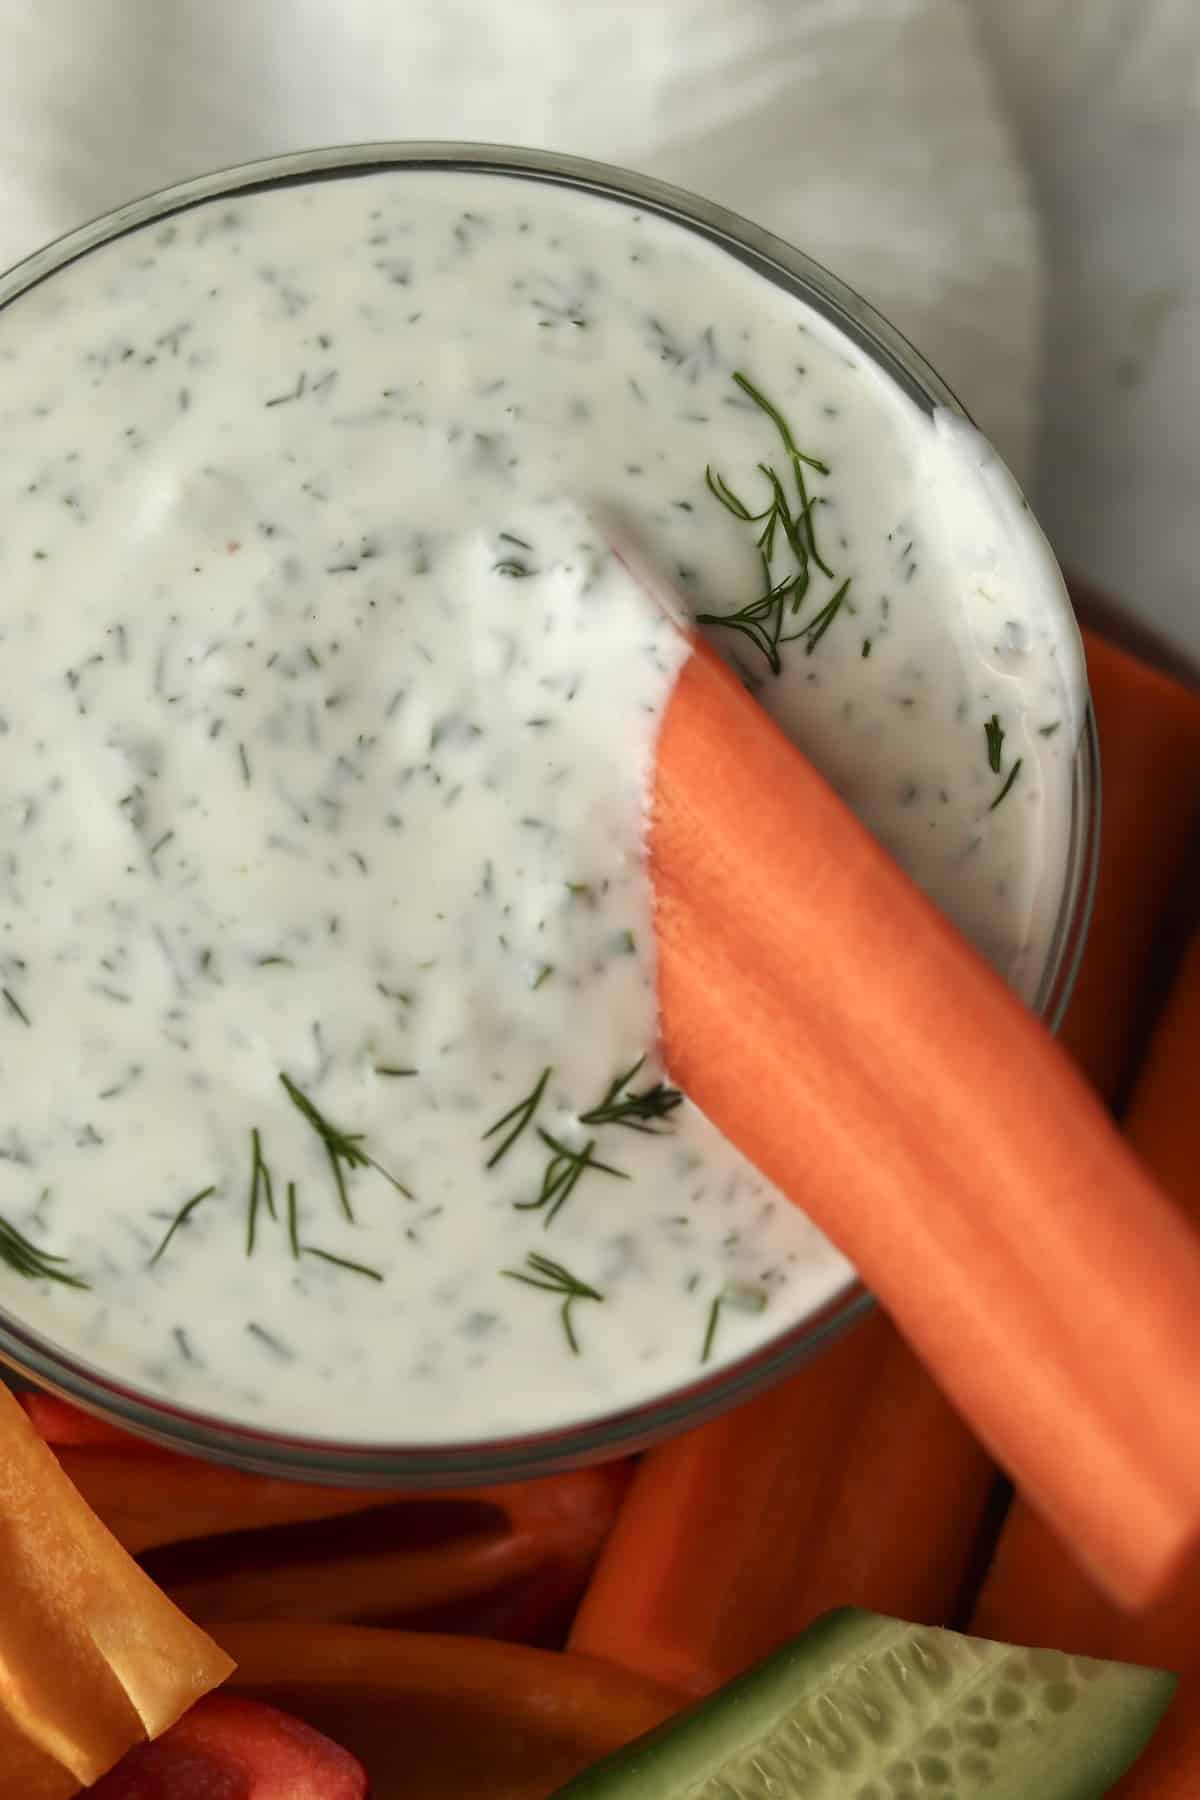 Carrot stick being dipped into ranch dressing.